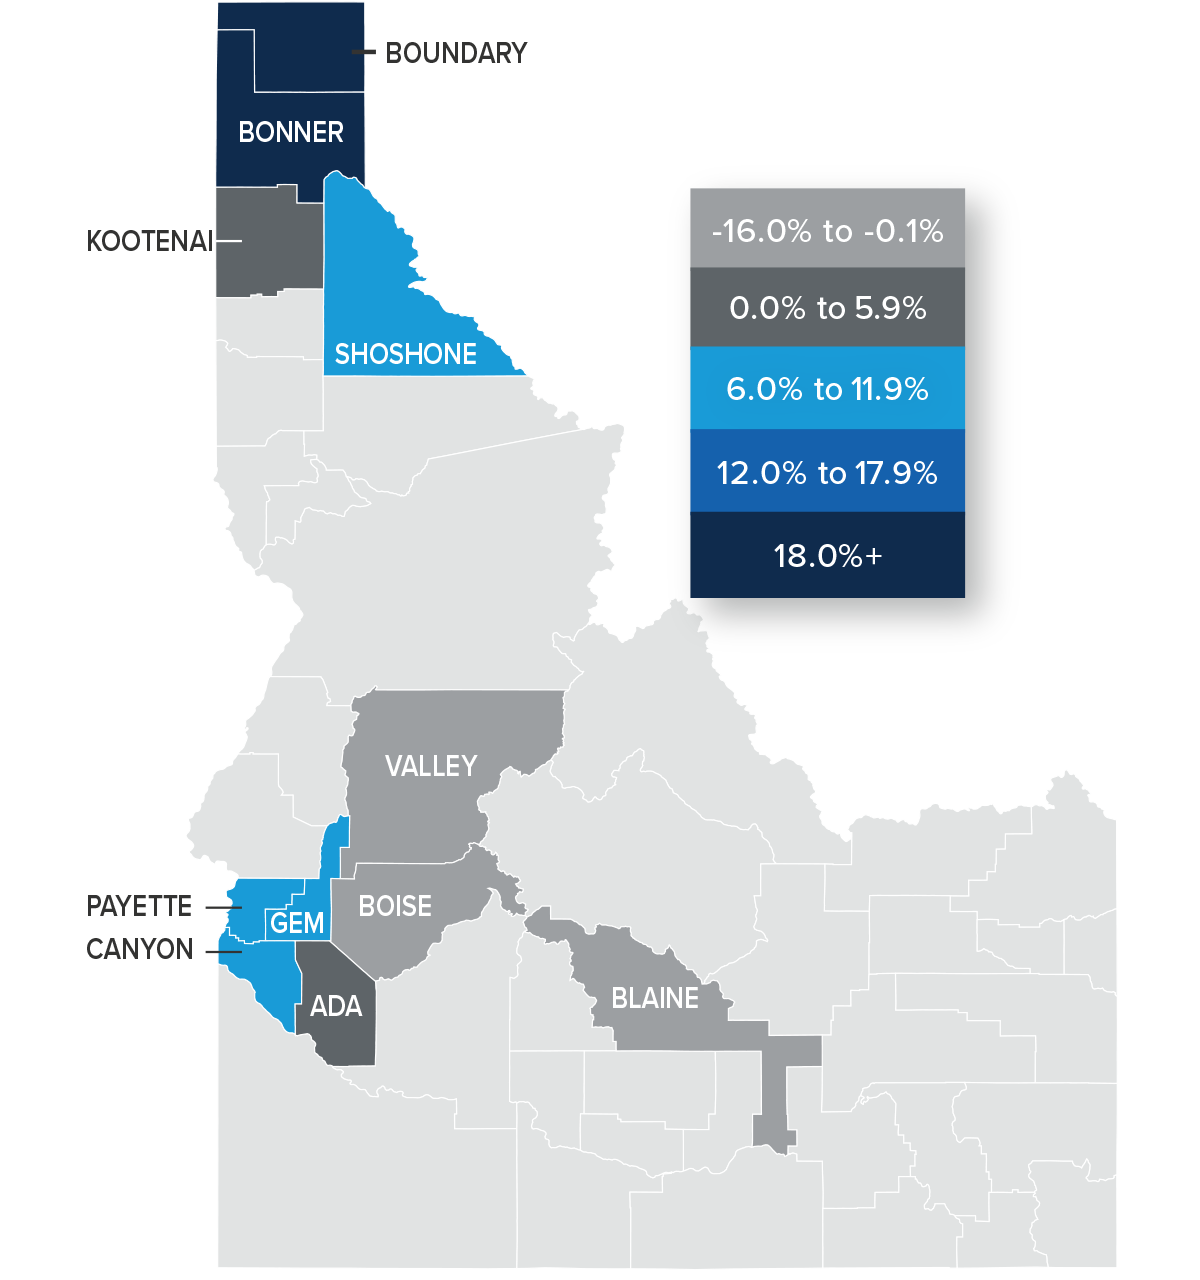 A map showing the real estate home prices percentage changes for various counties in Idaho. Different colors correspond to different tiers of percentage change. In the southern area of the state, Blaine, Boise, and Valley County have a percentage change in the -16% to -0.1% range. Ada is in the 0% to 5.9% change range, and Payette, Gem, and Canyon are in the 6% to 11.9% range. In the north, Kootenai is in the 0% to 5.9% range, while Shoshone is in the 6% to 11.9% rage and Bonner and Boundary are in the 18%+ range.